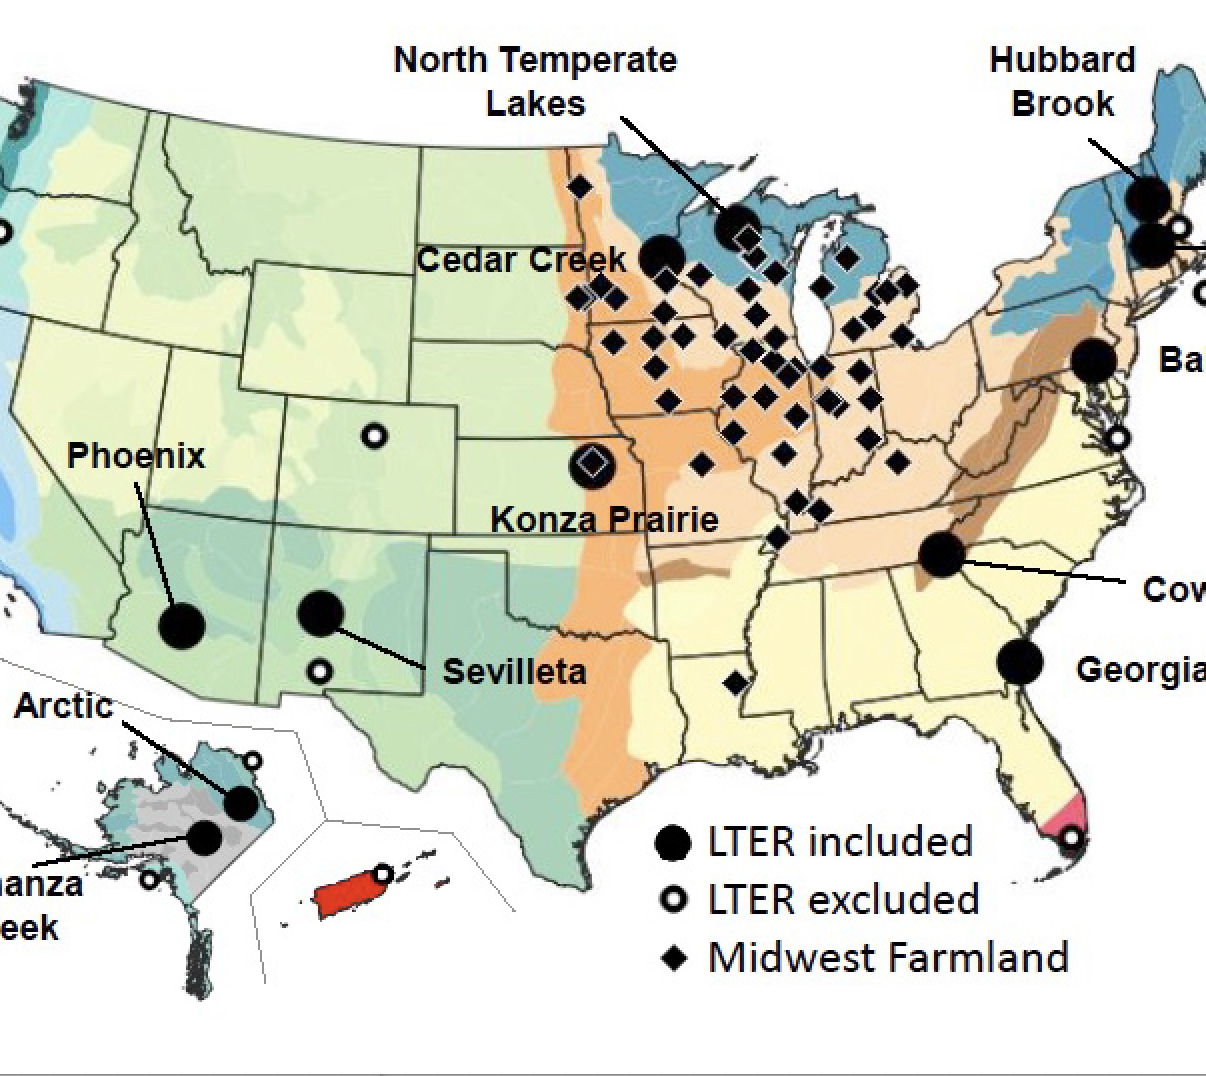 Filled black circles represent LTER sites with arthropod data that were included in the study. Colors on the underlying map delineate ecoregions as defined by the USDA Forest Service.